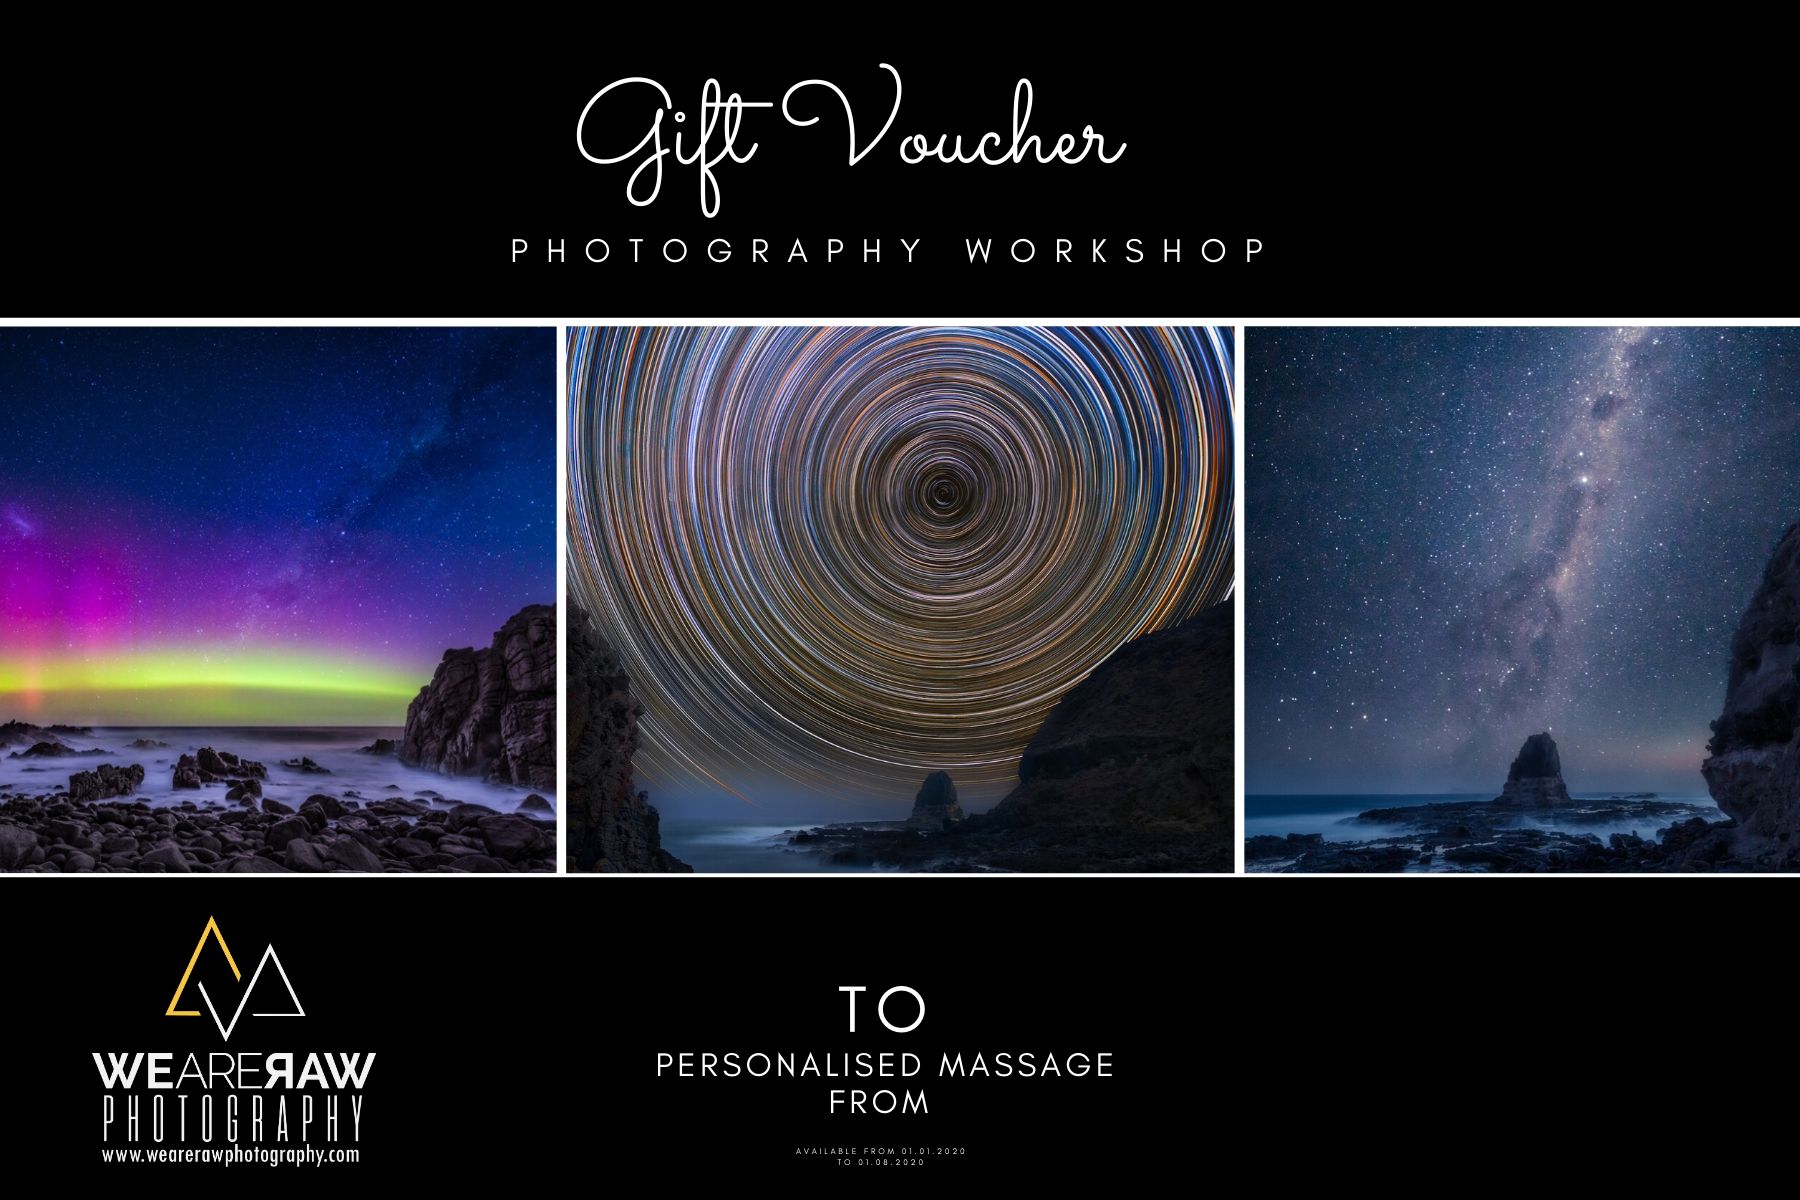 Photography Workshop Gift Vouchers-Personalised Gifts voucher gift idea photo workshops courses lessons_We Are Raw Photography Workshops Tours Melbourne